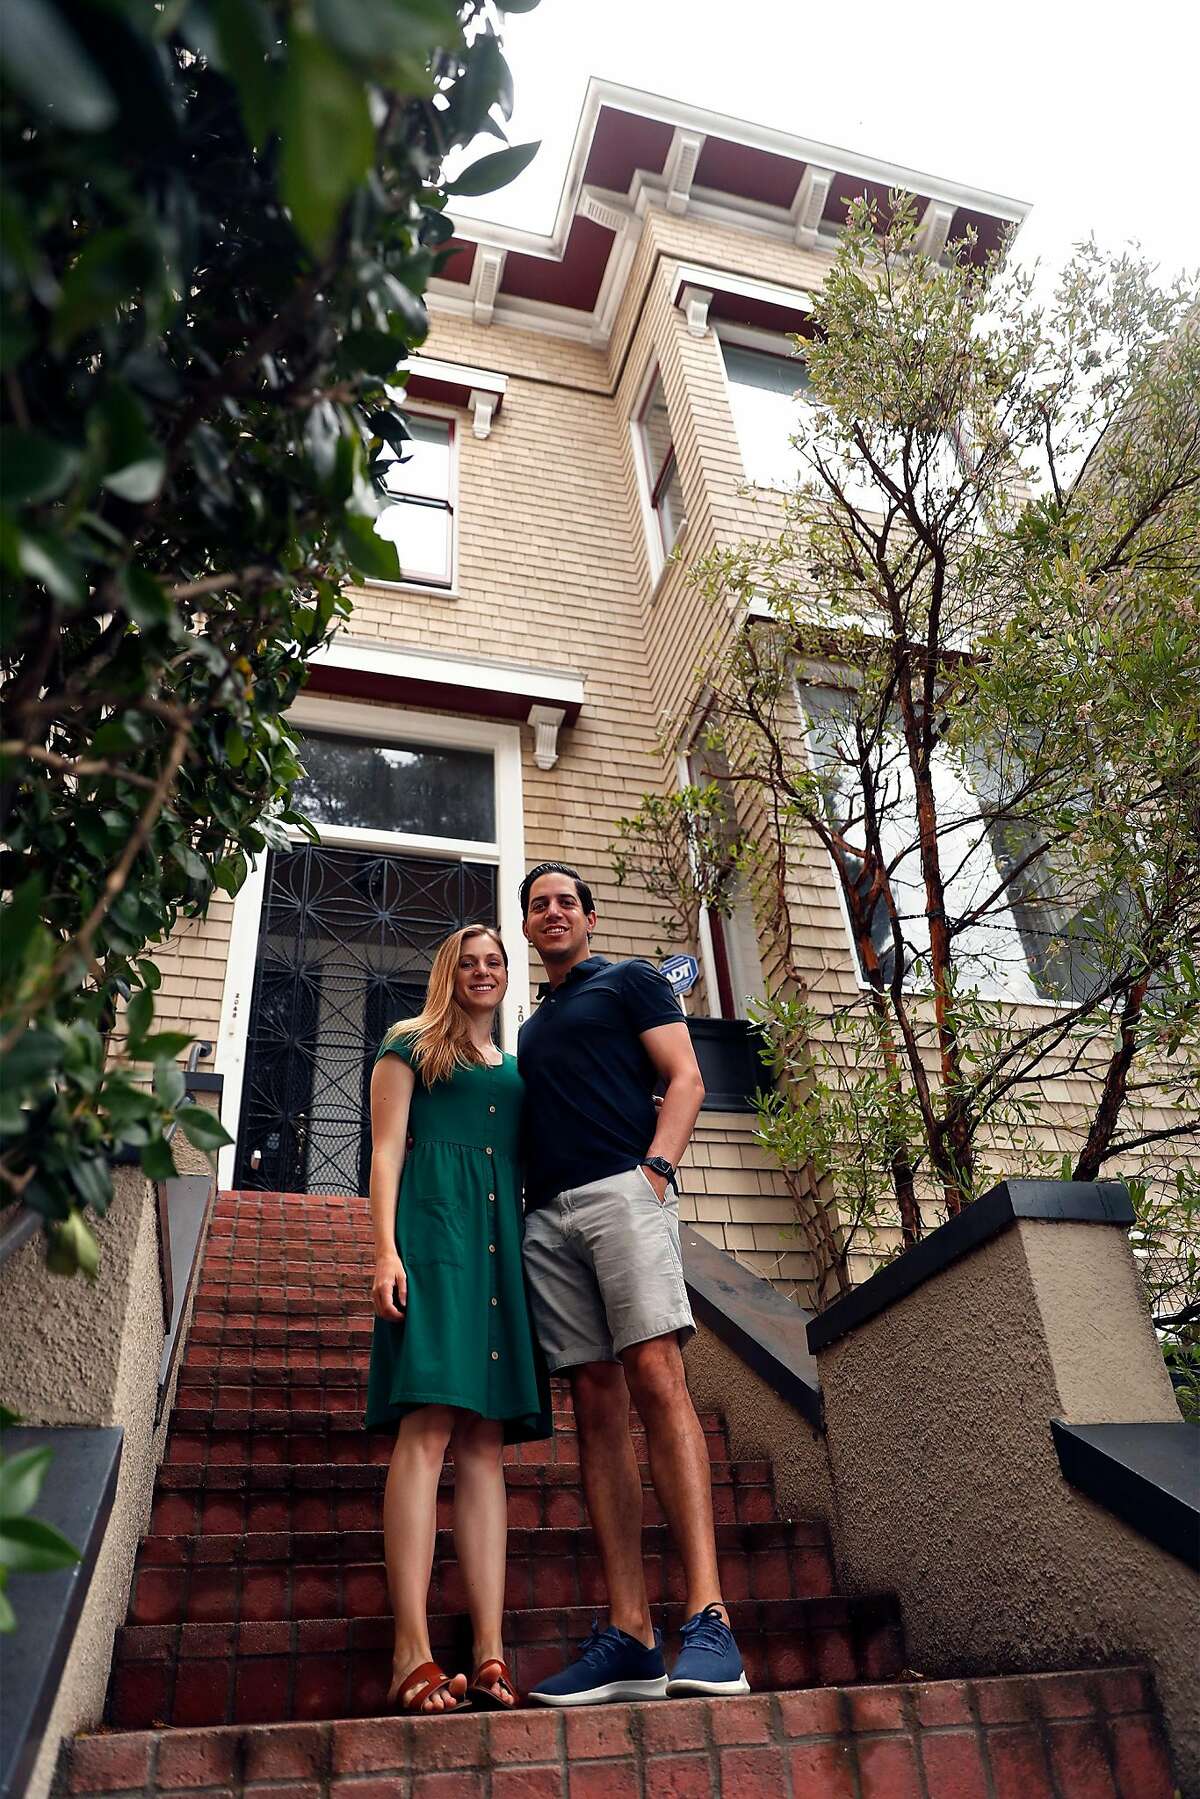 Shanna Wagnor and her husband, Sean Lewis, in front of their Pacific Heights condo in San Francisco, Calif., on Sunday, August 16, 2020. The couple are selling their San Francisco residence after buying a larger house in Piedmont.